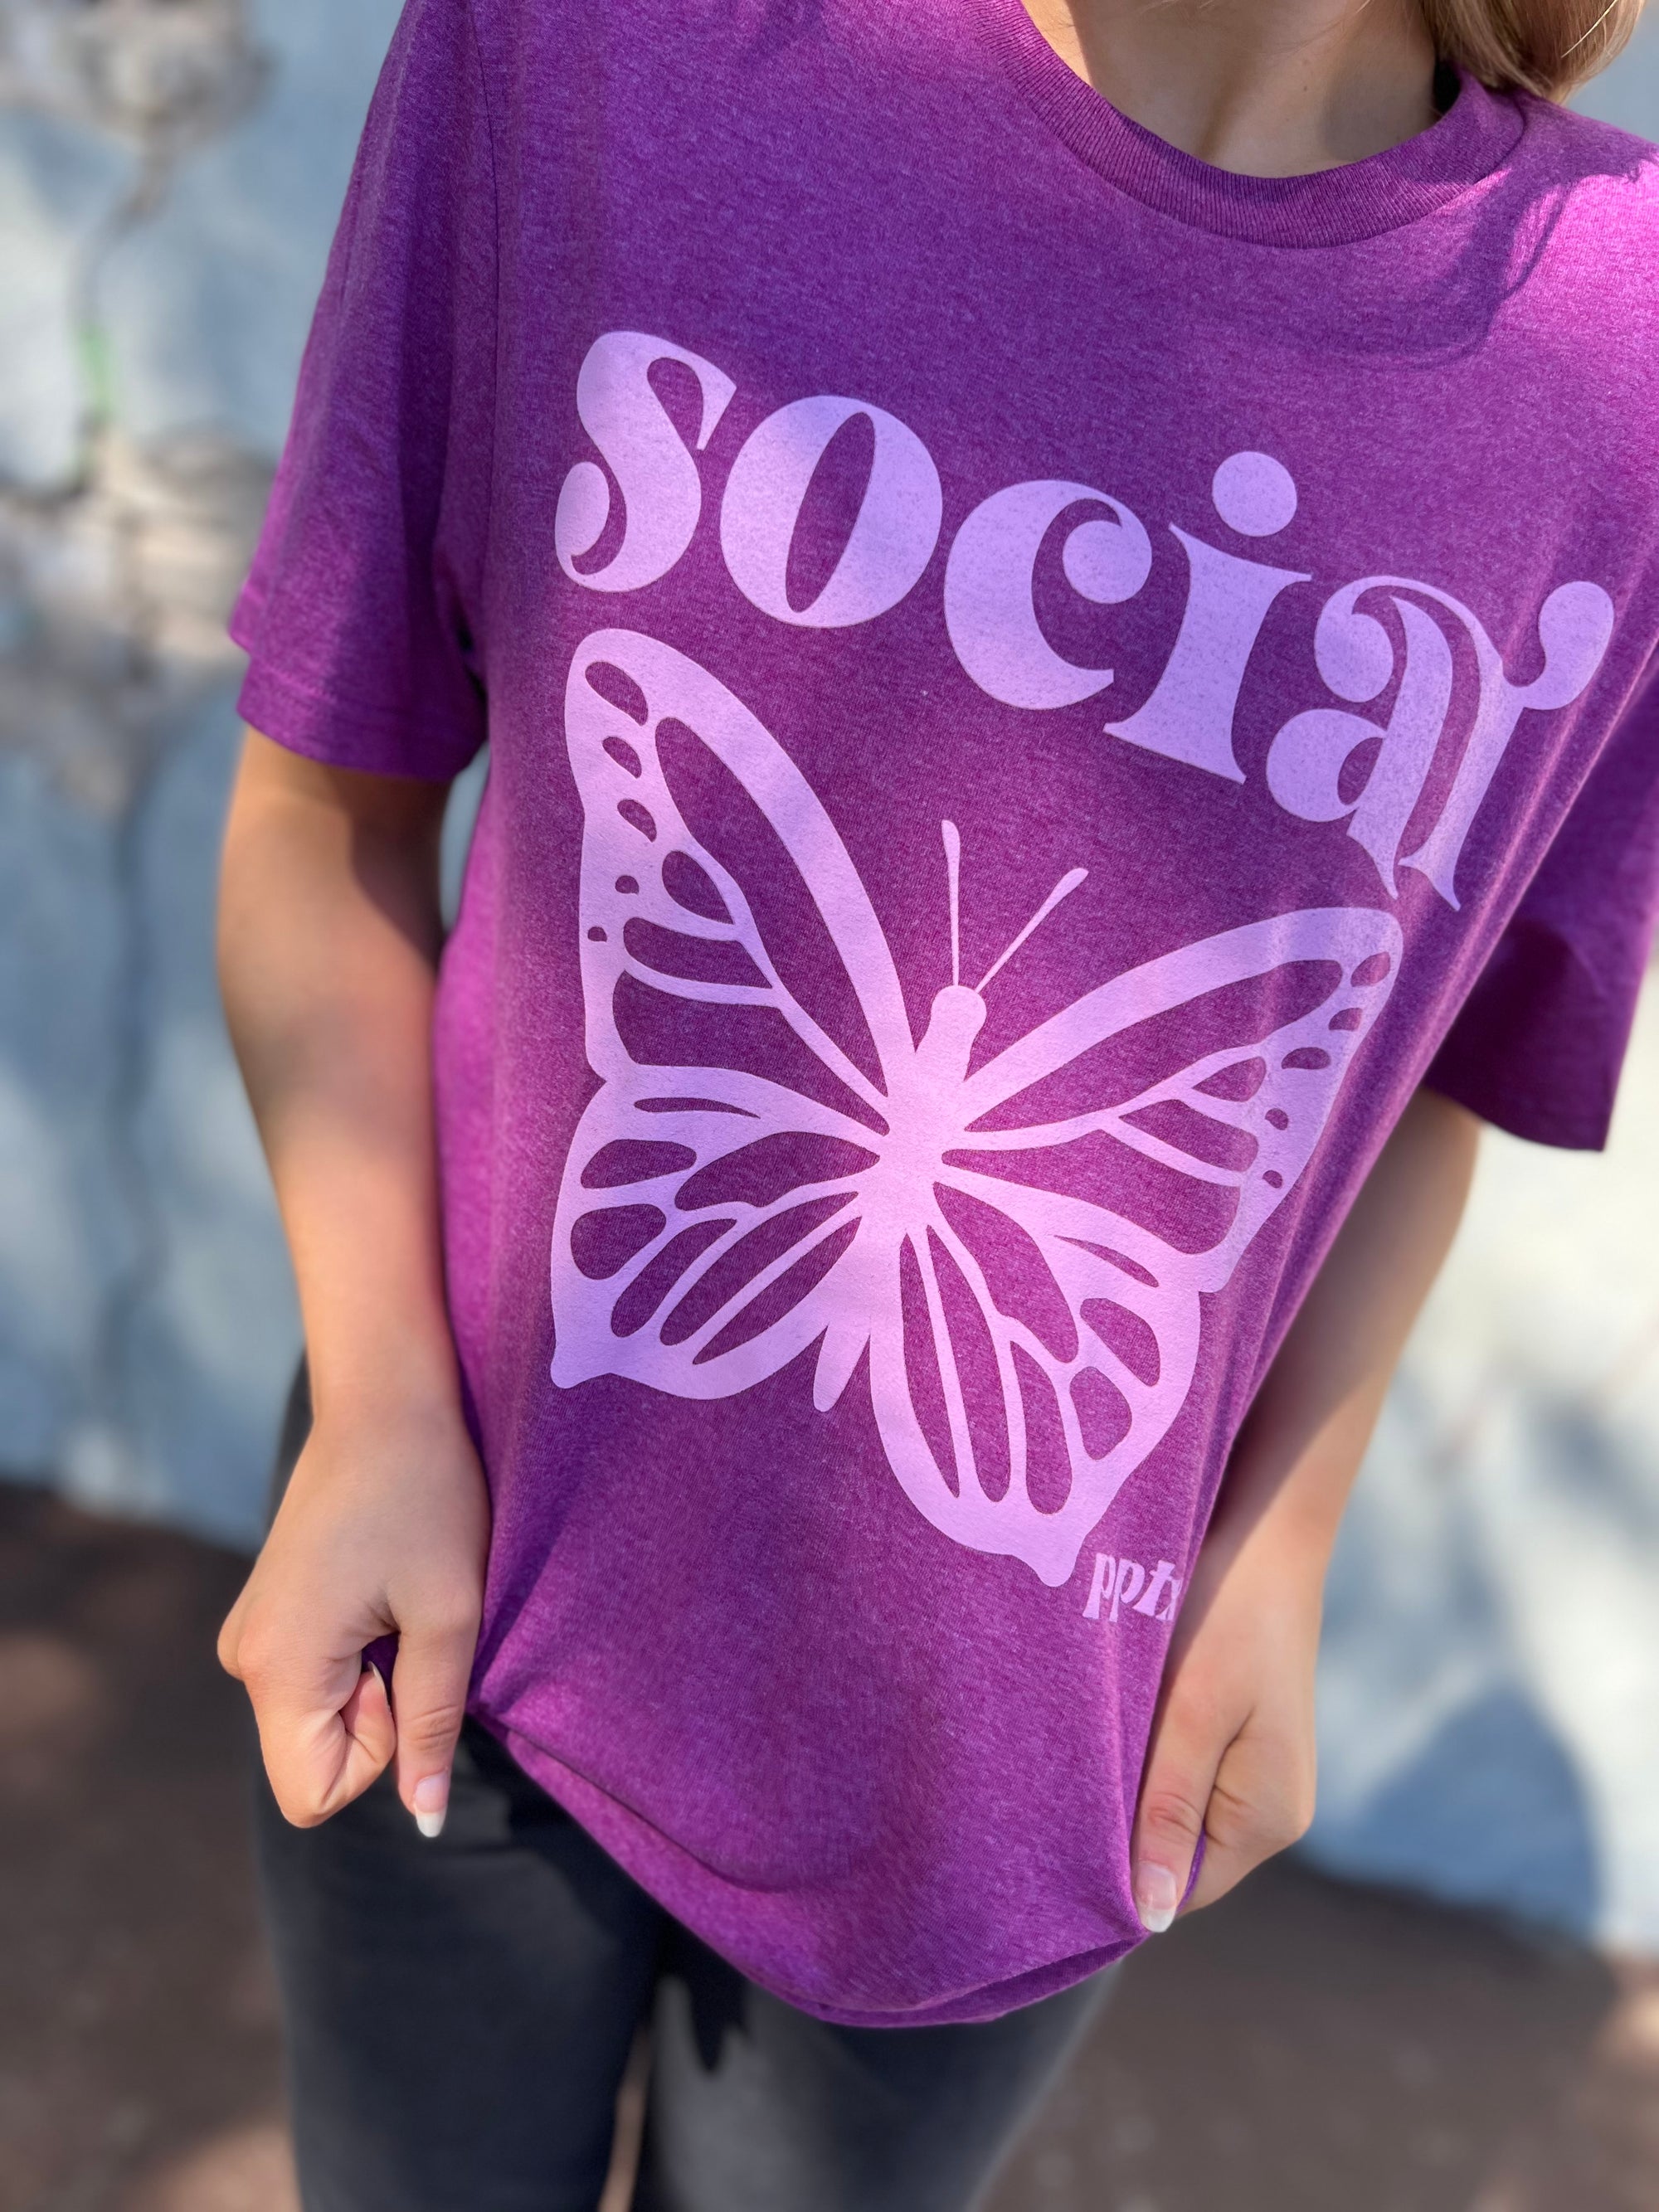 Graphic Tee - Retro Social Butterfly